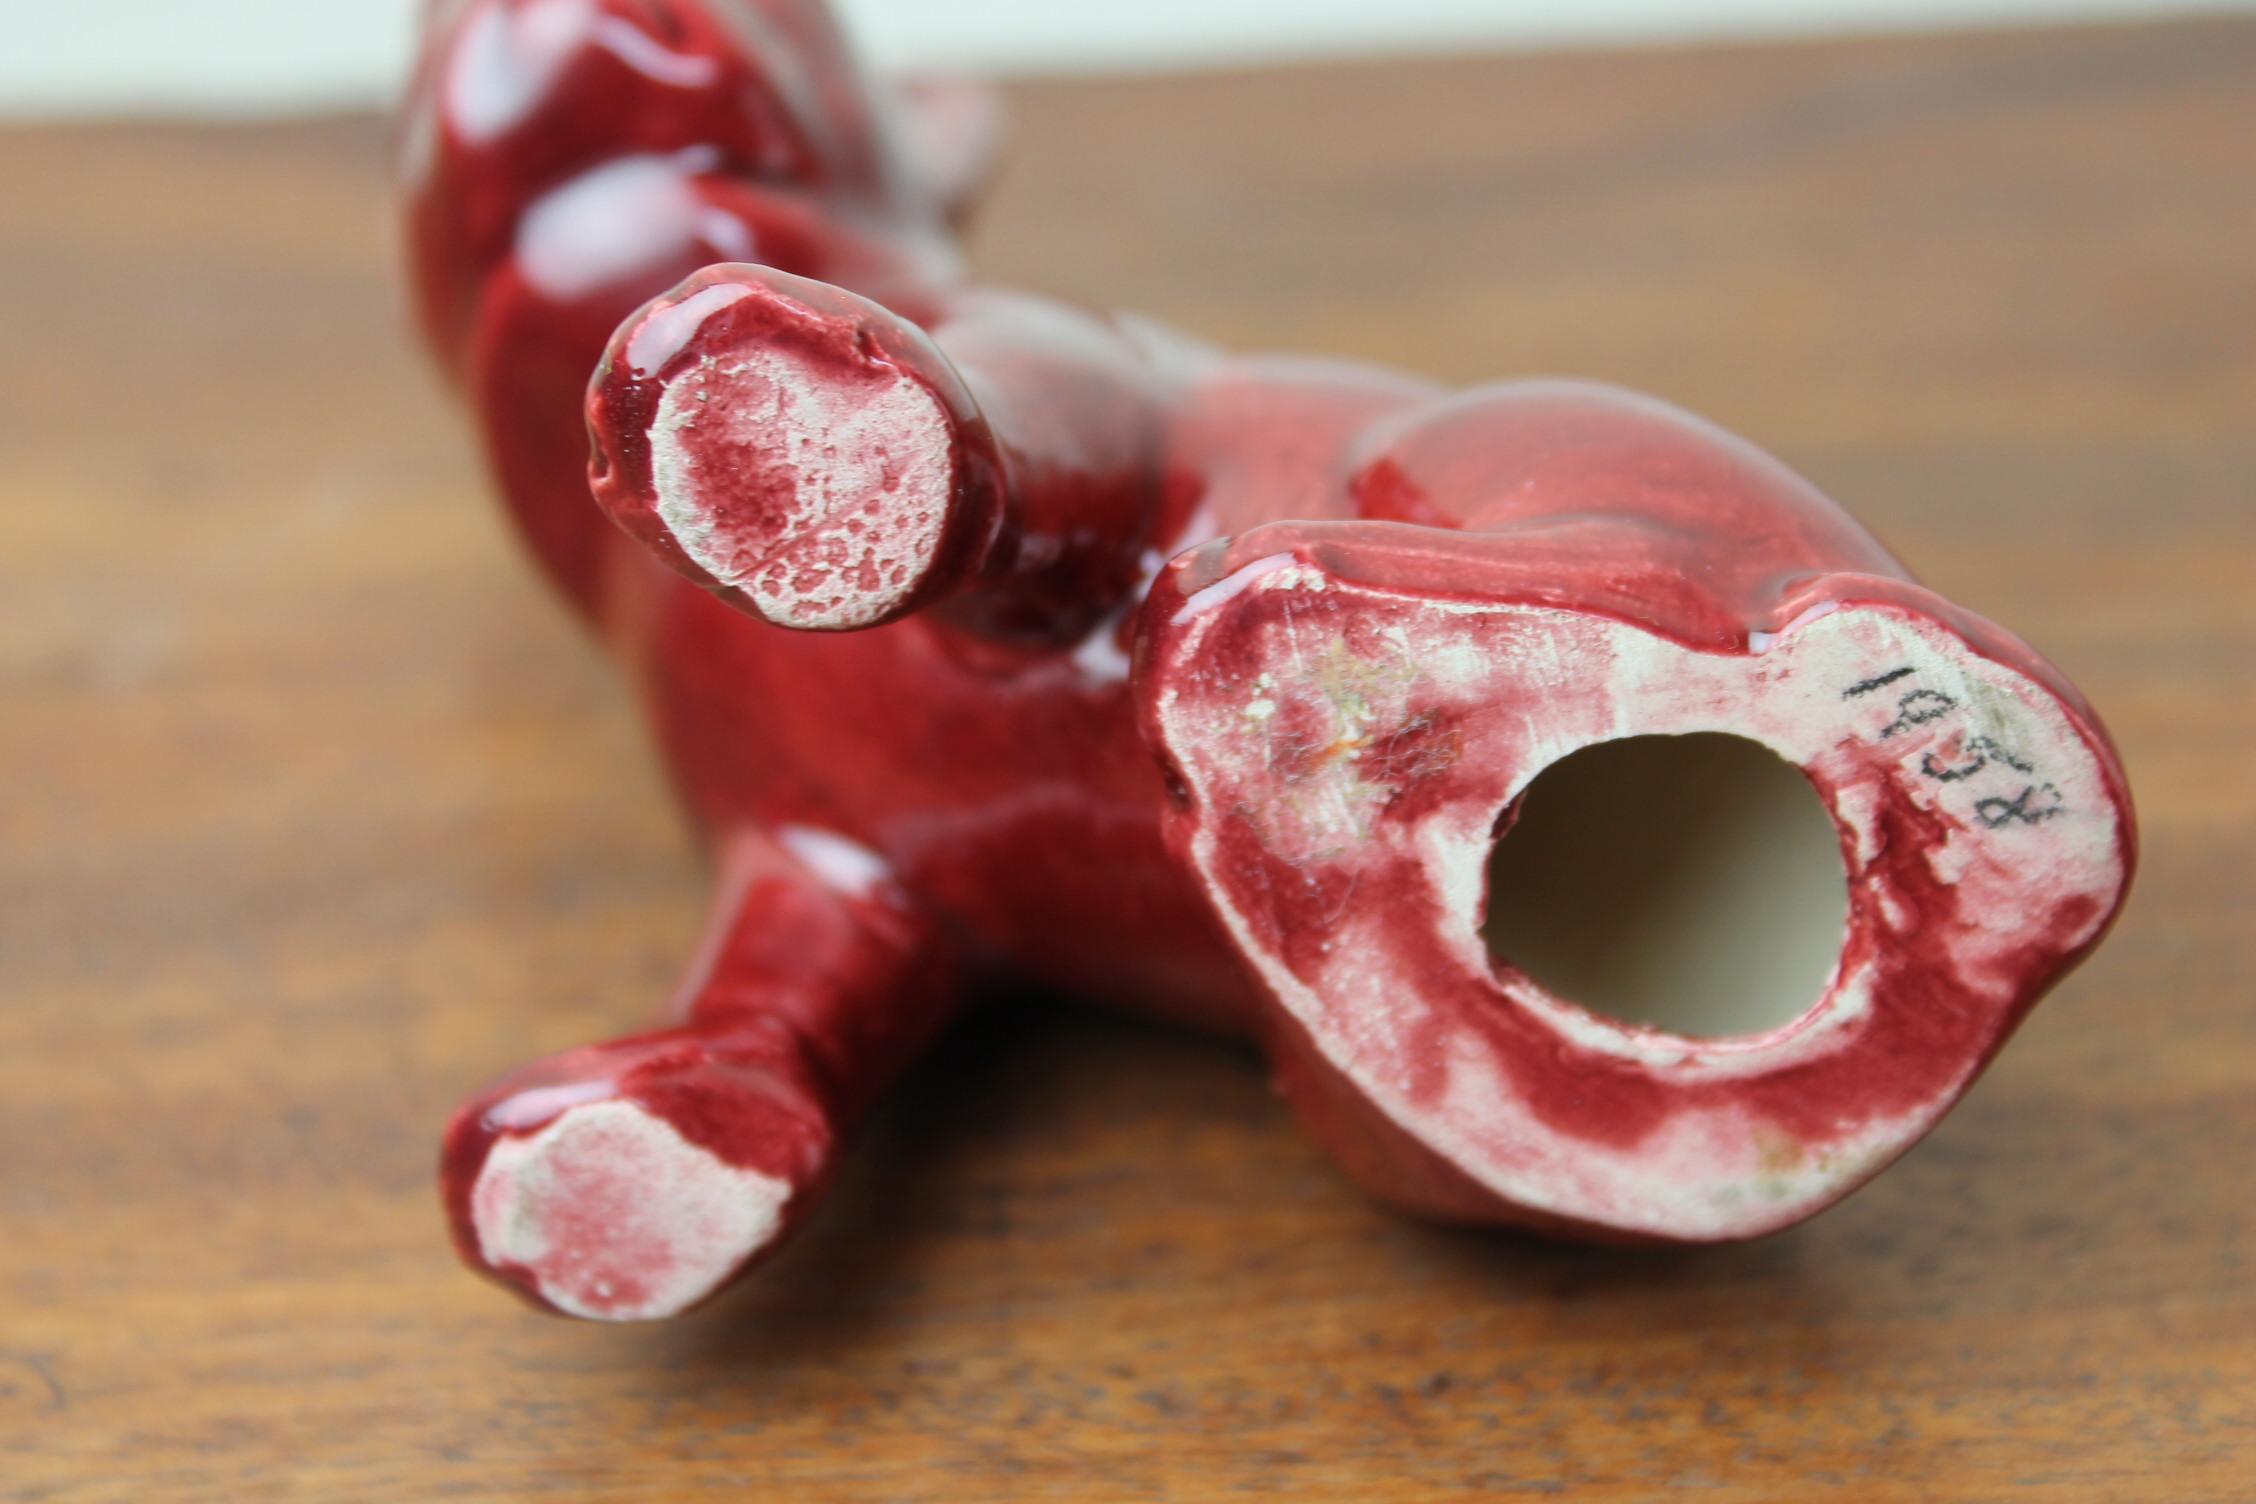 1950s Red-Bordeaux French Bulldog Figurine 3